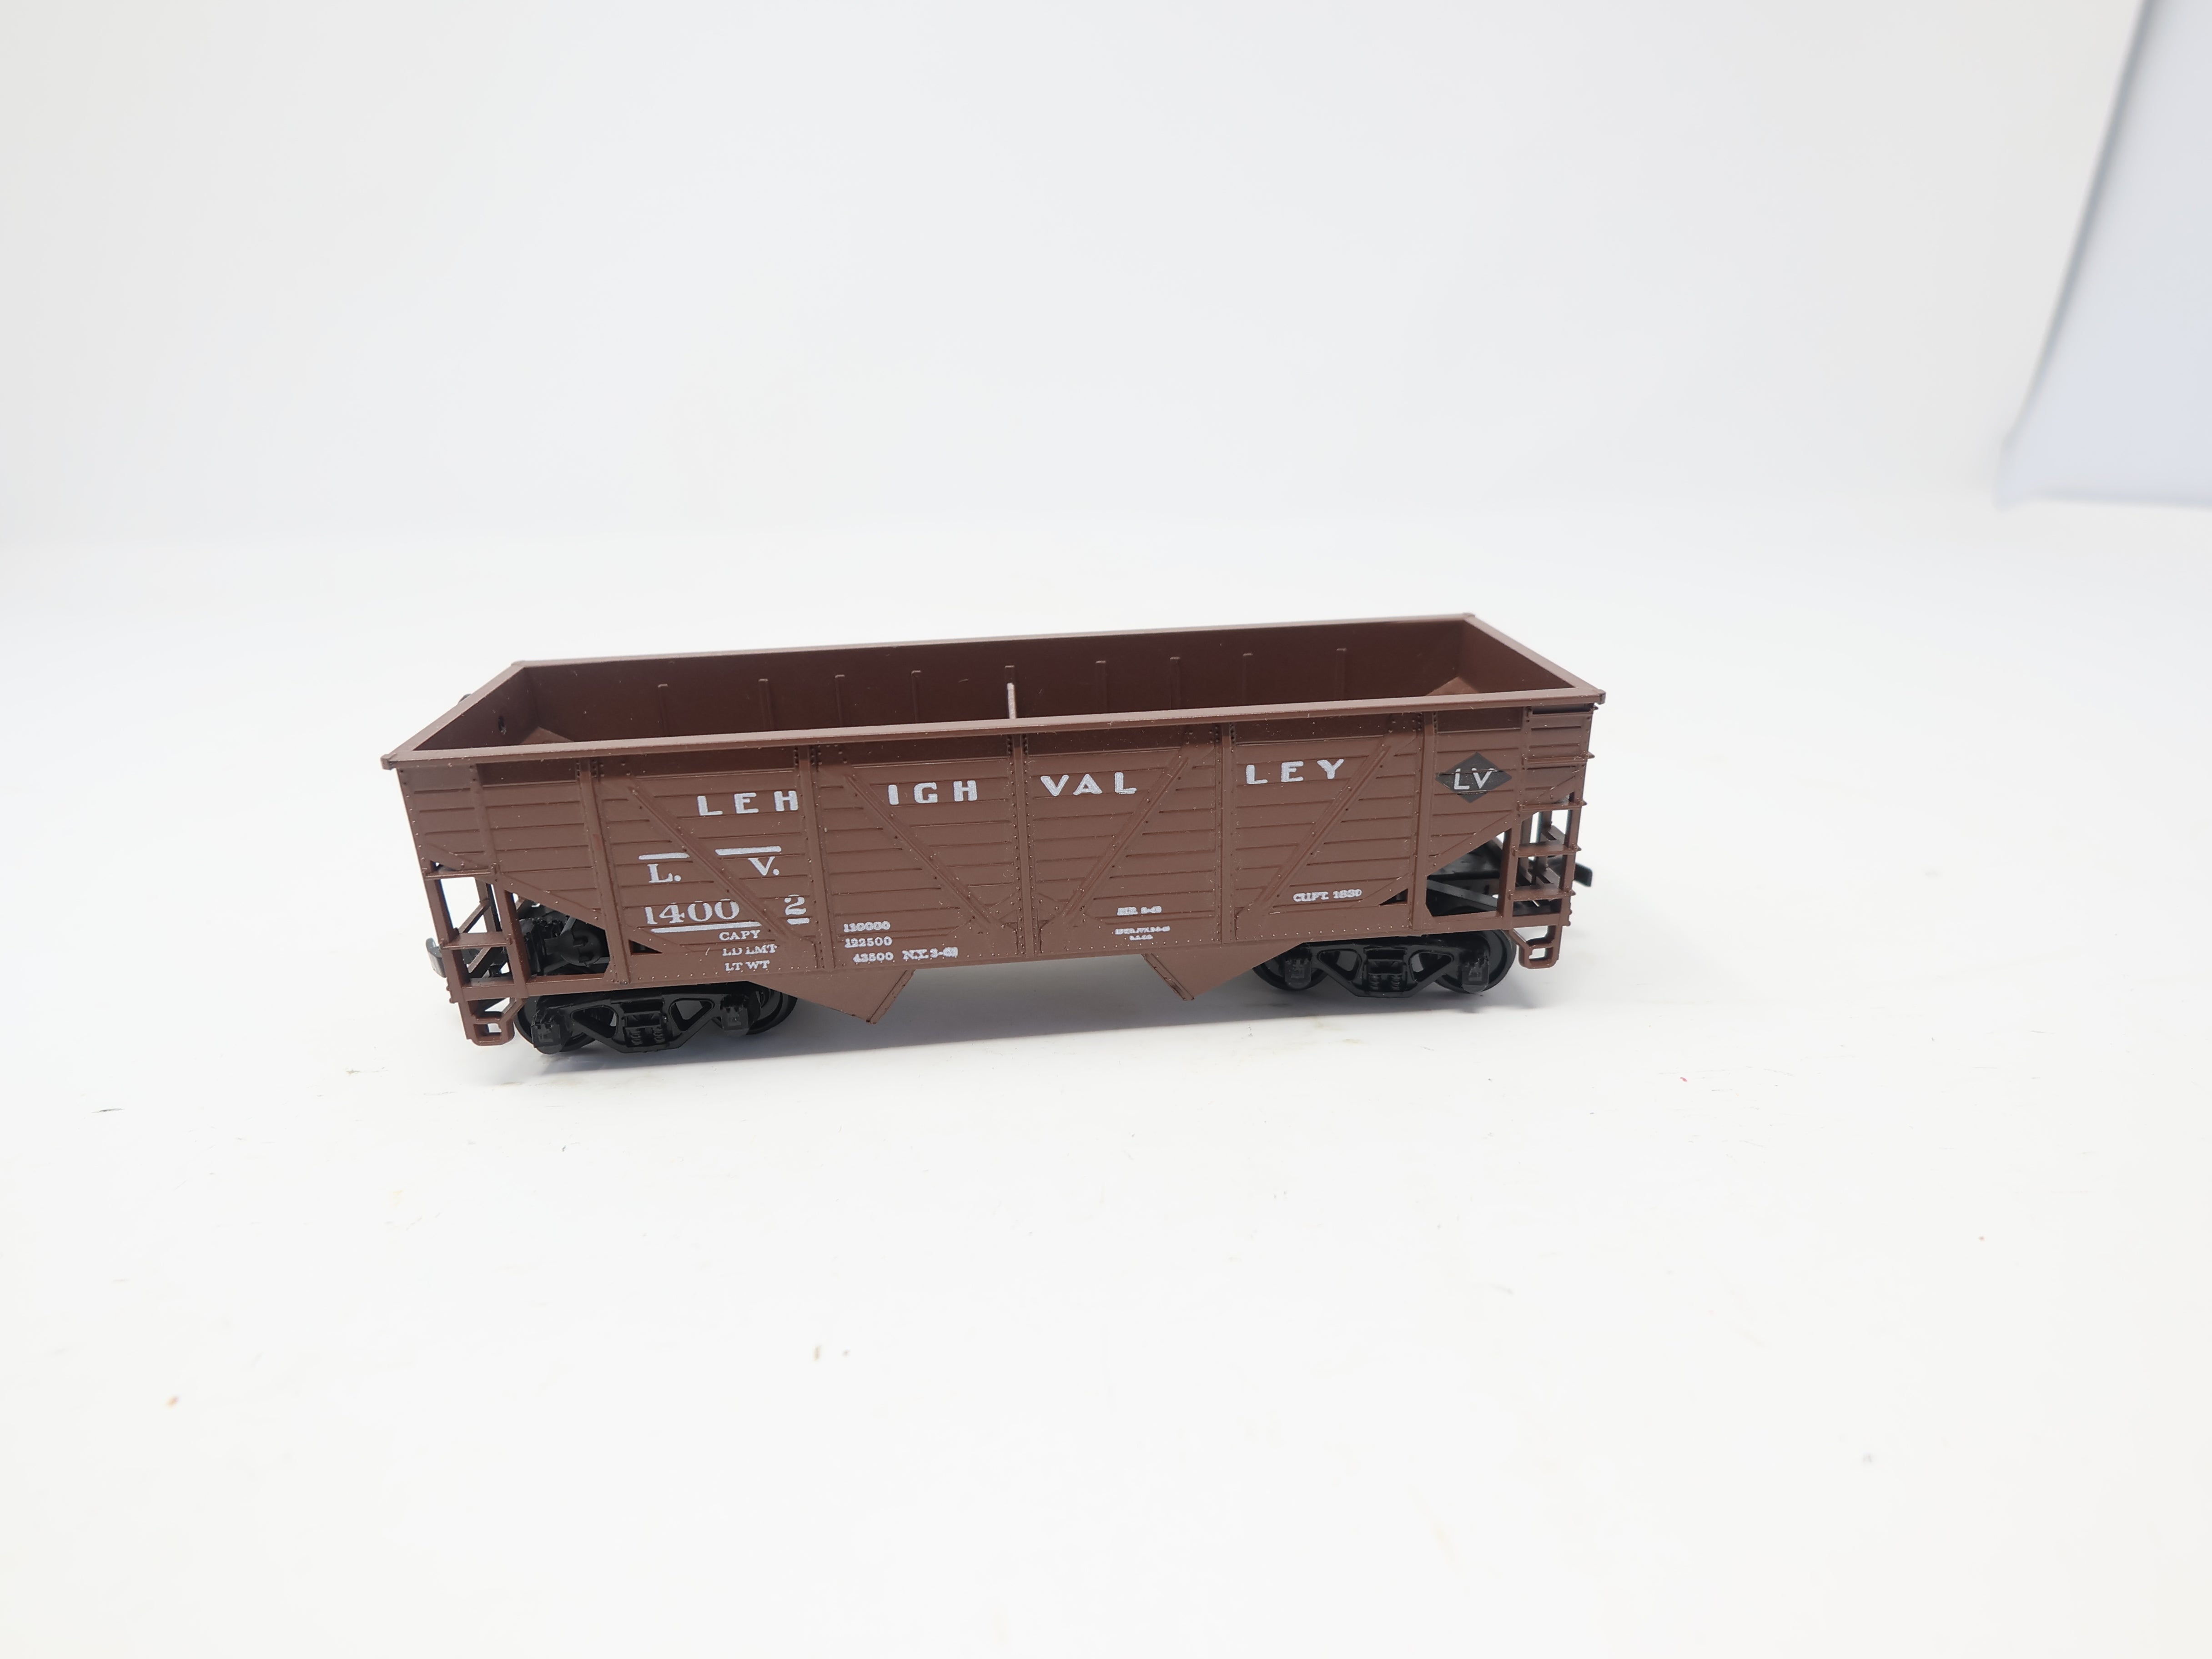 USED Athearn HO Scale, 2 Bay Wood Sided Open Hopper, Lehigh Valley LV #14002